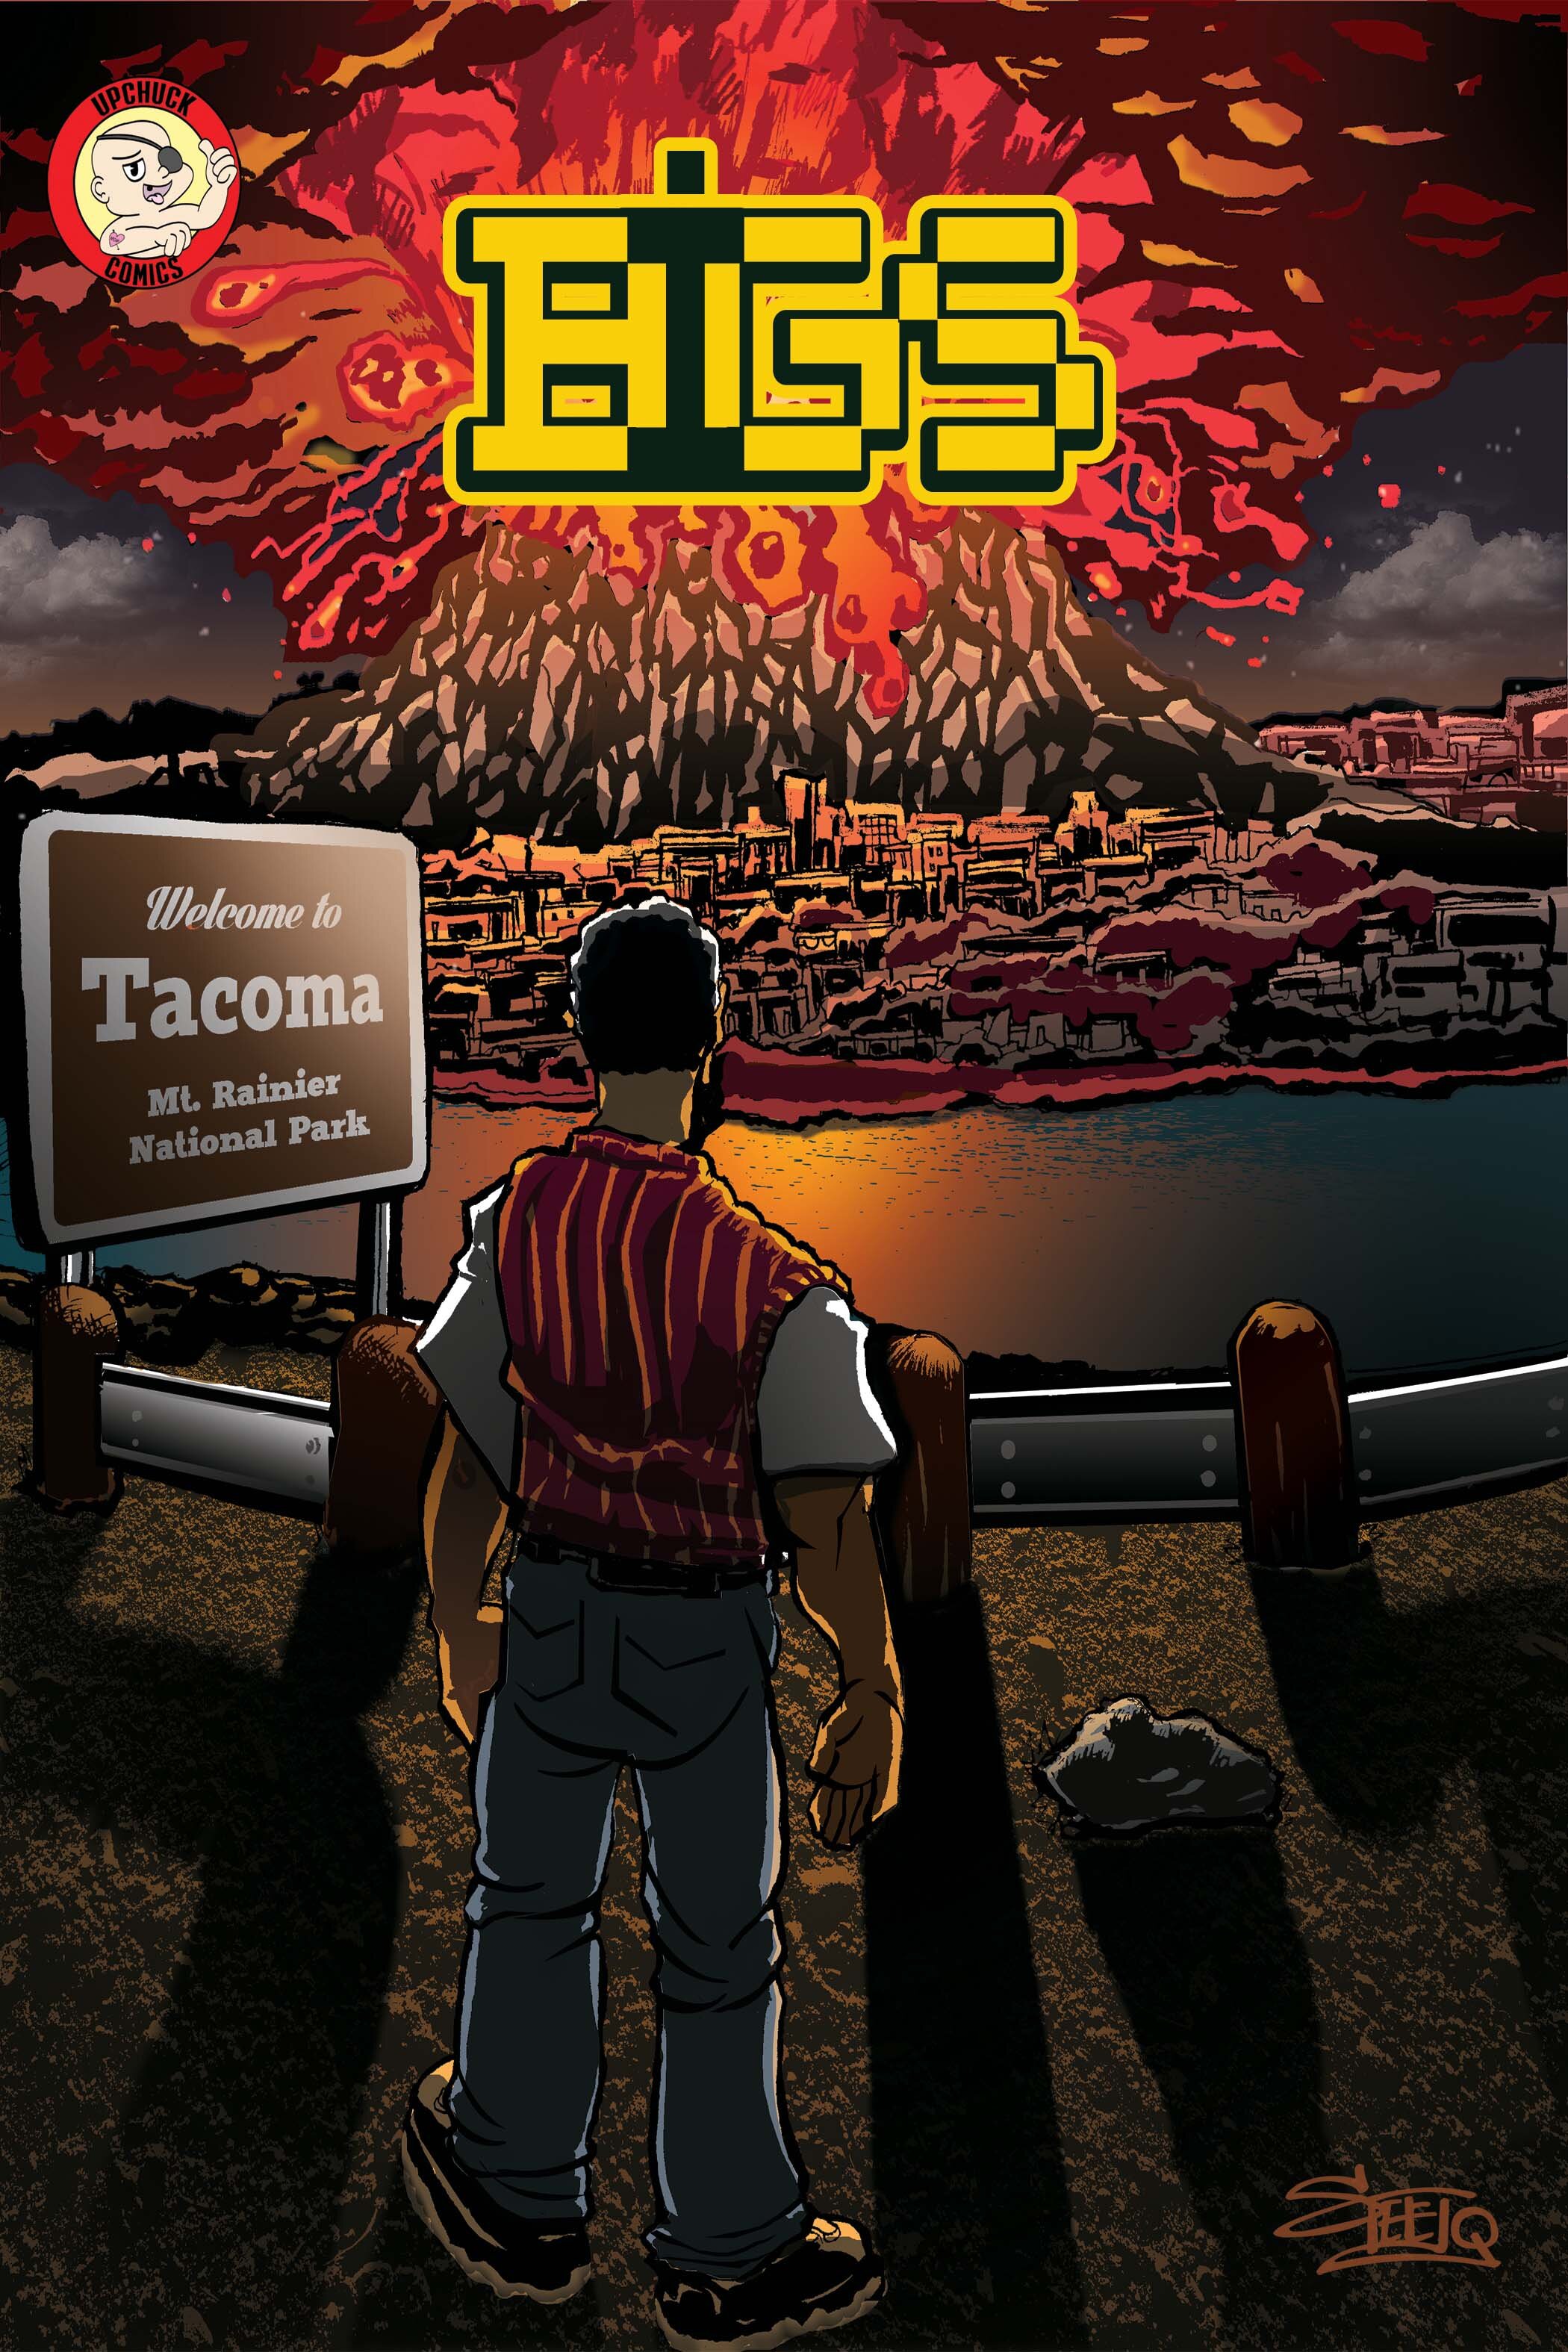 Issue 1 Comic Cover 2019.jpg